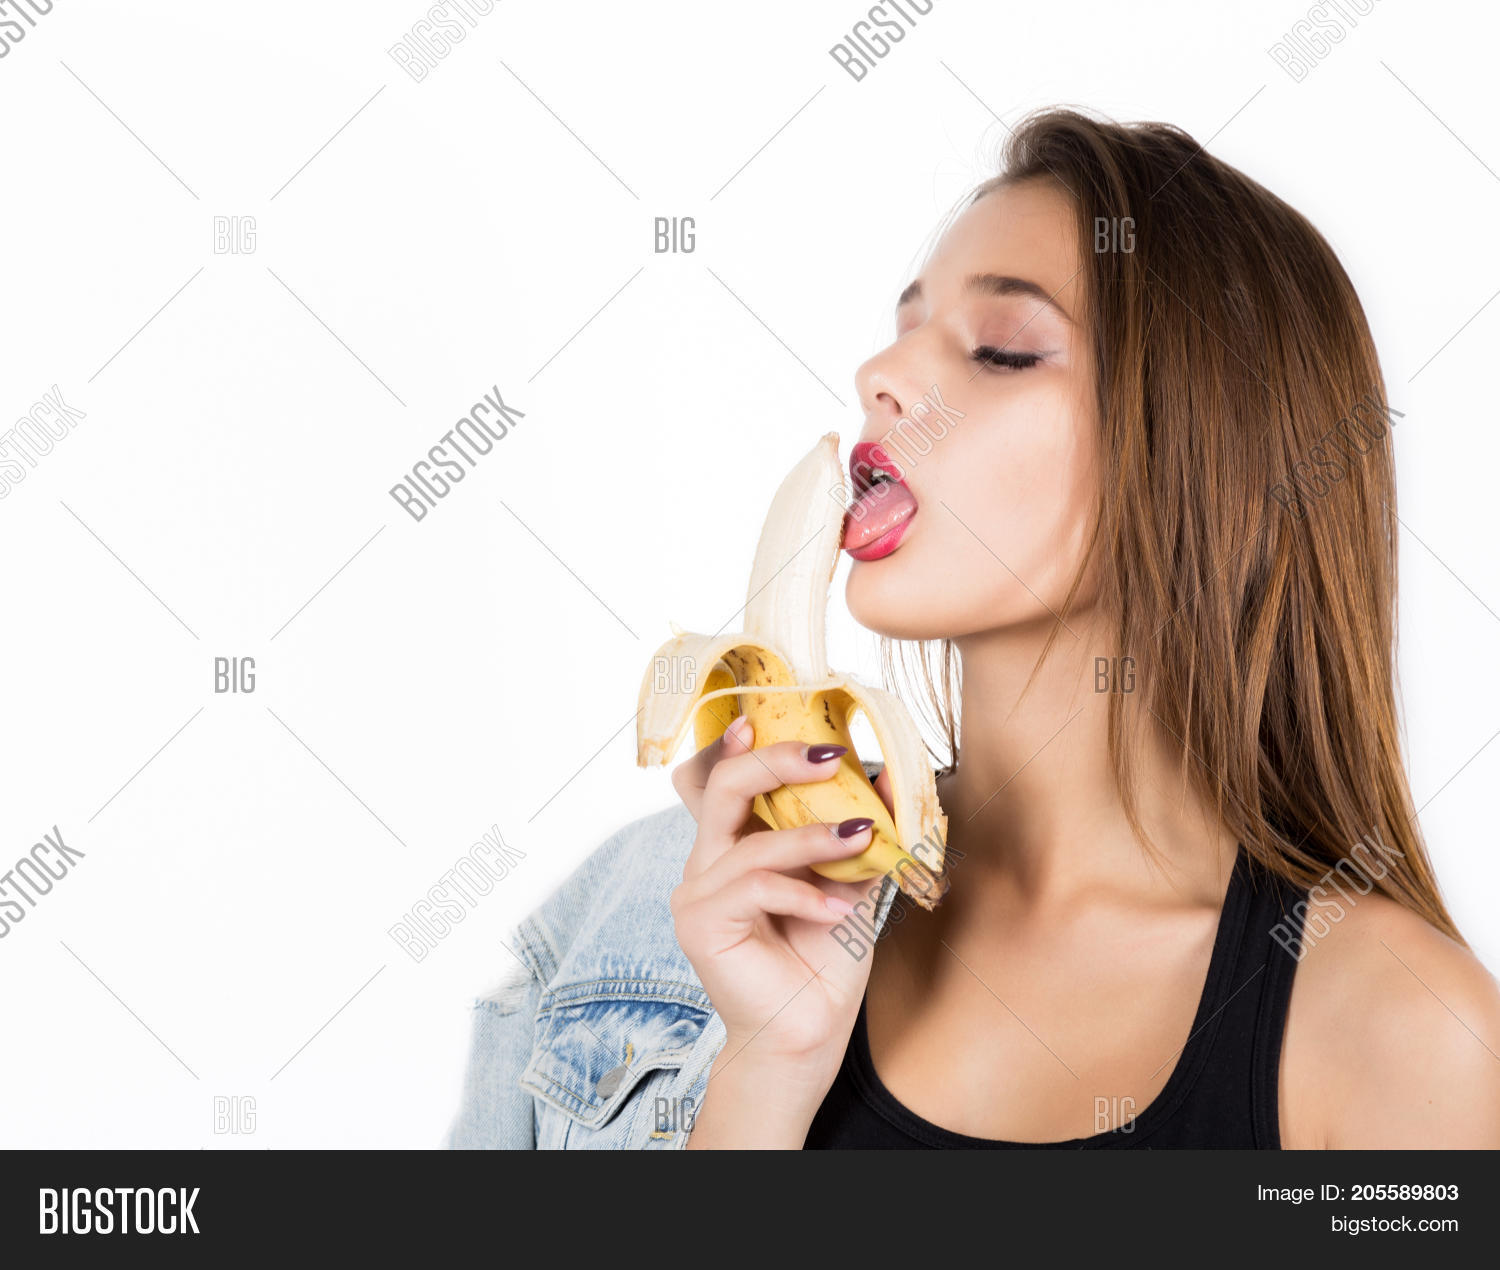 alba gomez recommends woman eating banana picture pic